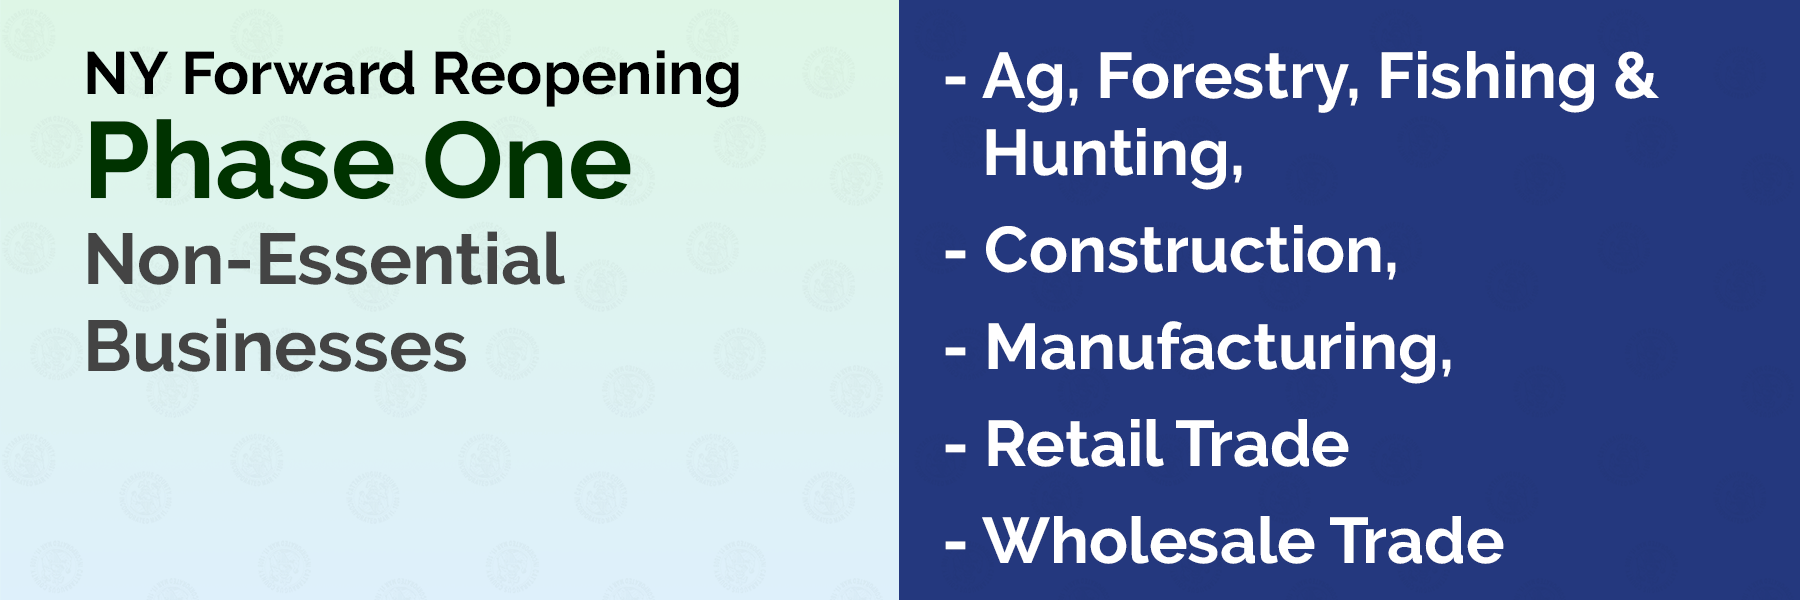 NY Forward Reopening Phase One, Non-Essential Businesses: Ag, Forestry, Fishing & Hunting, Construction, Manufacturing, Retail Trade, Wholesale Trade